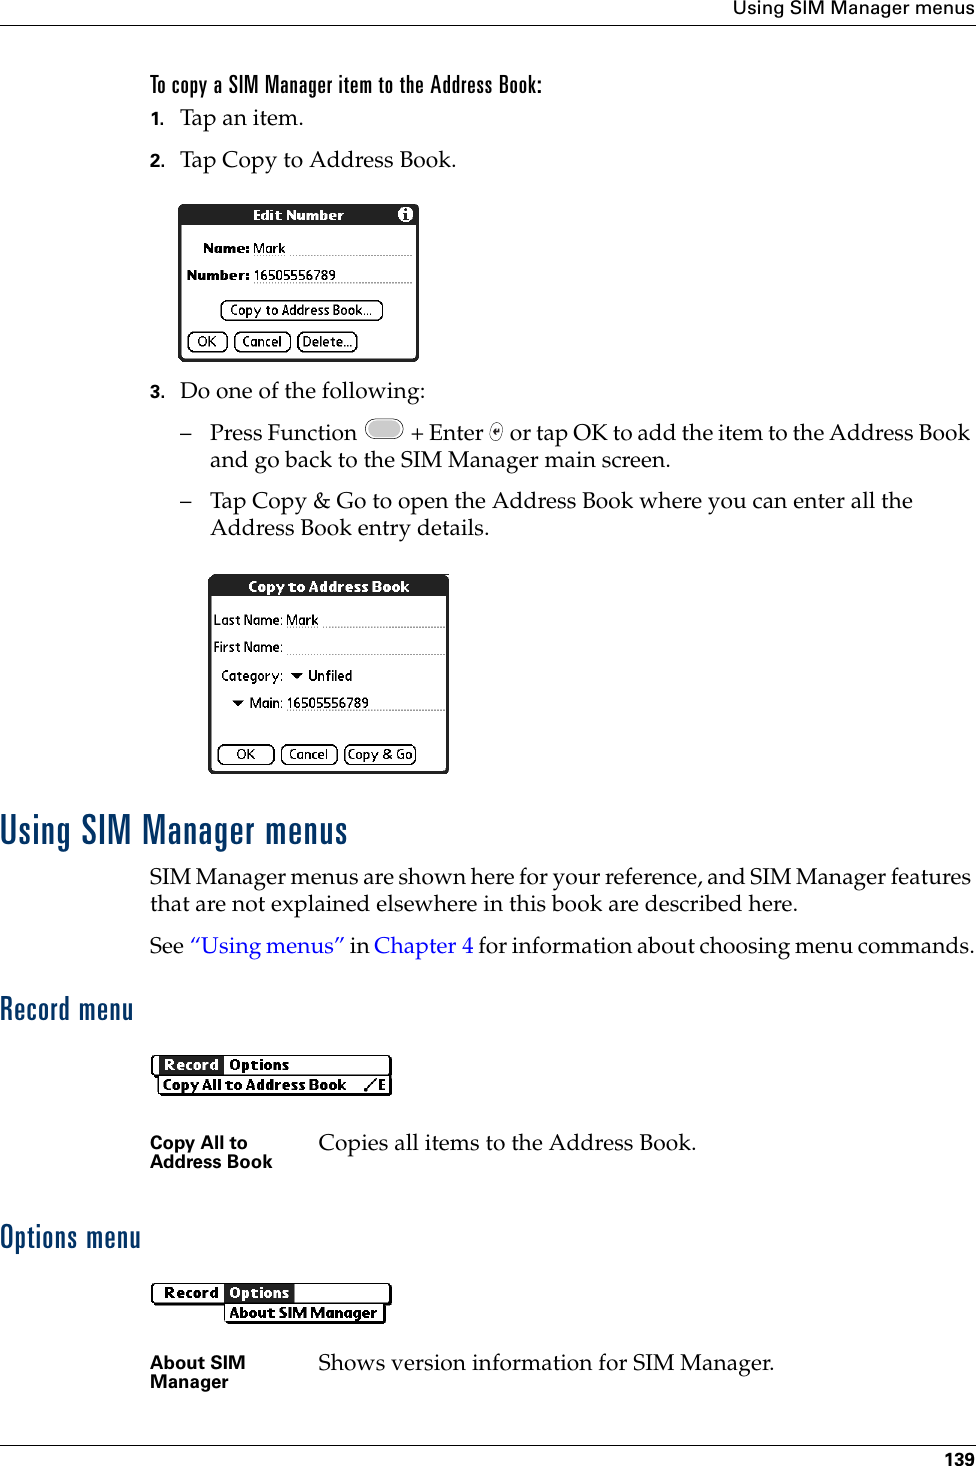 Using SIM Manager menus139To copy a SIM Manager item to the Address Book:1. Tap an item.2. Tap Copy to Address Book.3. Do one of the following:– Press Function   + Enter   or tap OK to add the item to the Address Book and go back to the SIM Manager main screen.– Tap Copy &amp; Go to open the Address Book where you can enter all the Address Book entry details.Using SIM Manager menusSIM Manager menus are shown here for your reference, and SIM Manager features that are not explained elsewhere in this book are described here.See “Using menus” in Chapter 4 for information about choosing menu commands.Record menuOptions menuCopy All to Address Book Copies all items to the Address Book.About SIM Manager Shows version information for SIM Manager.Palm, Inc. Confidential